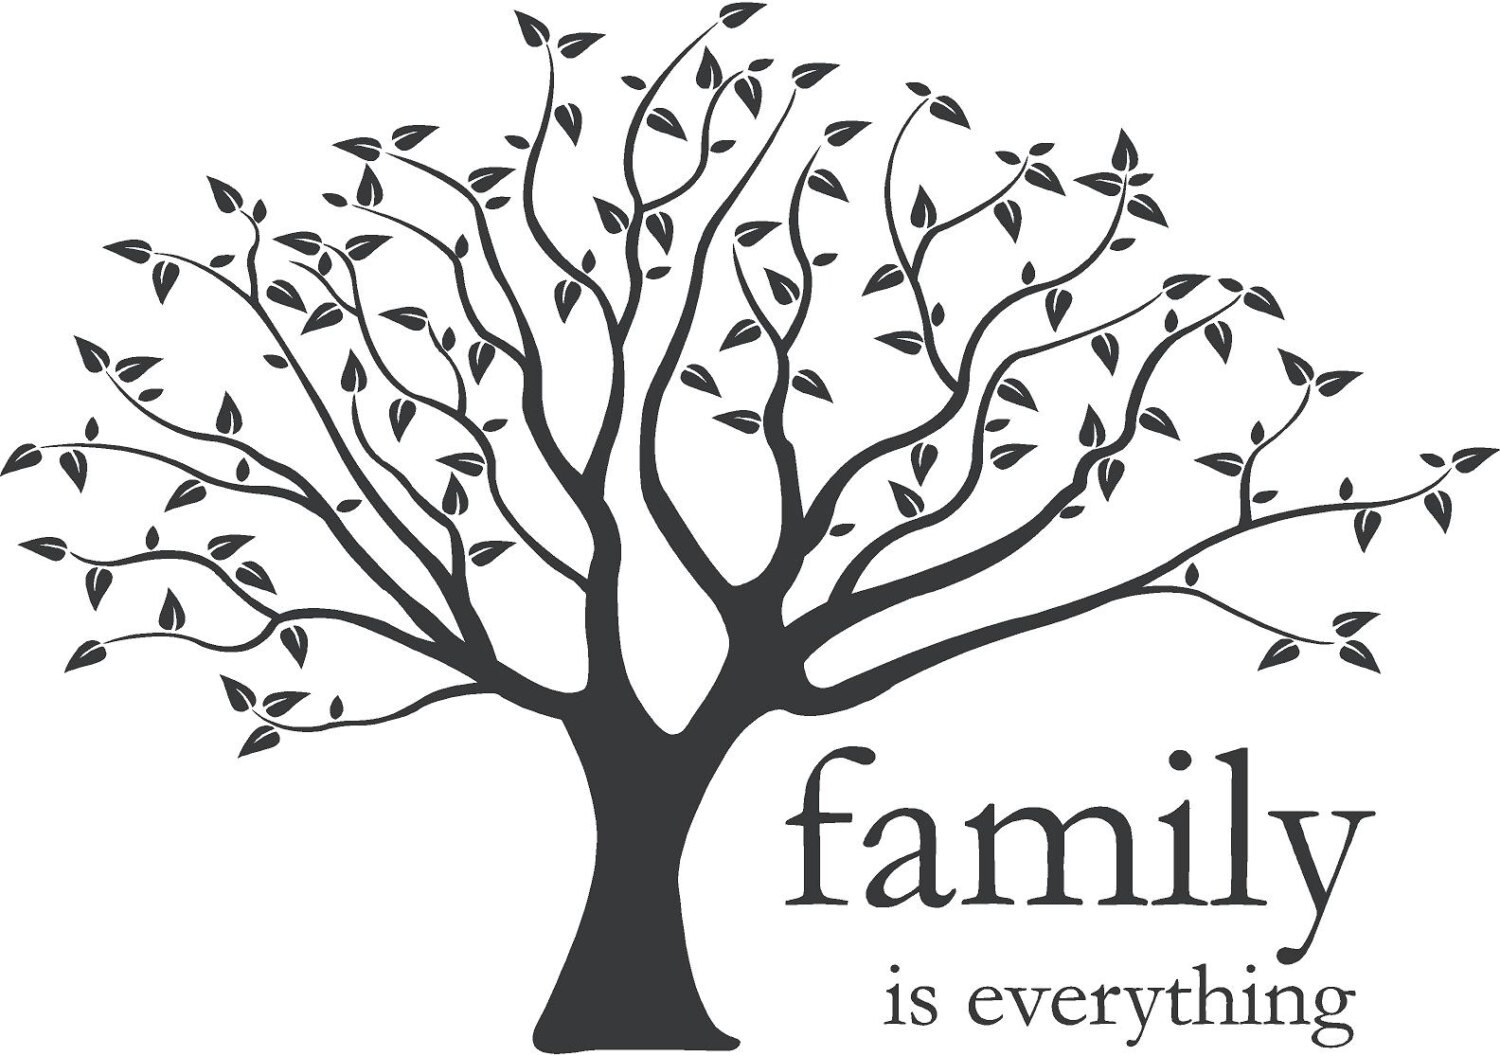 Family is everything Vinyl Lettering Wall Art in Words | Etsy